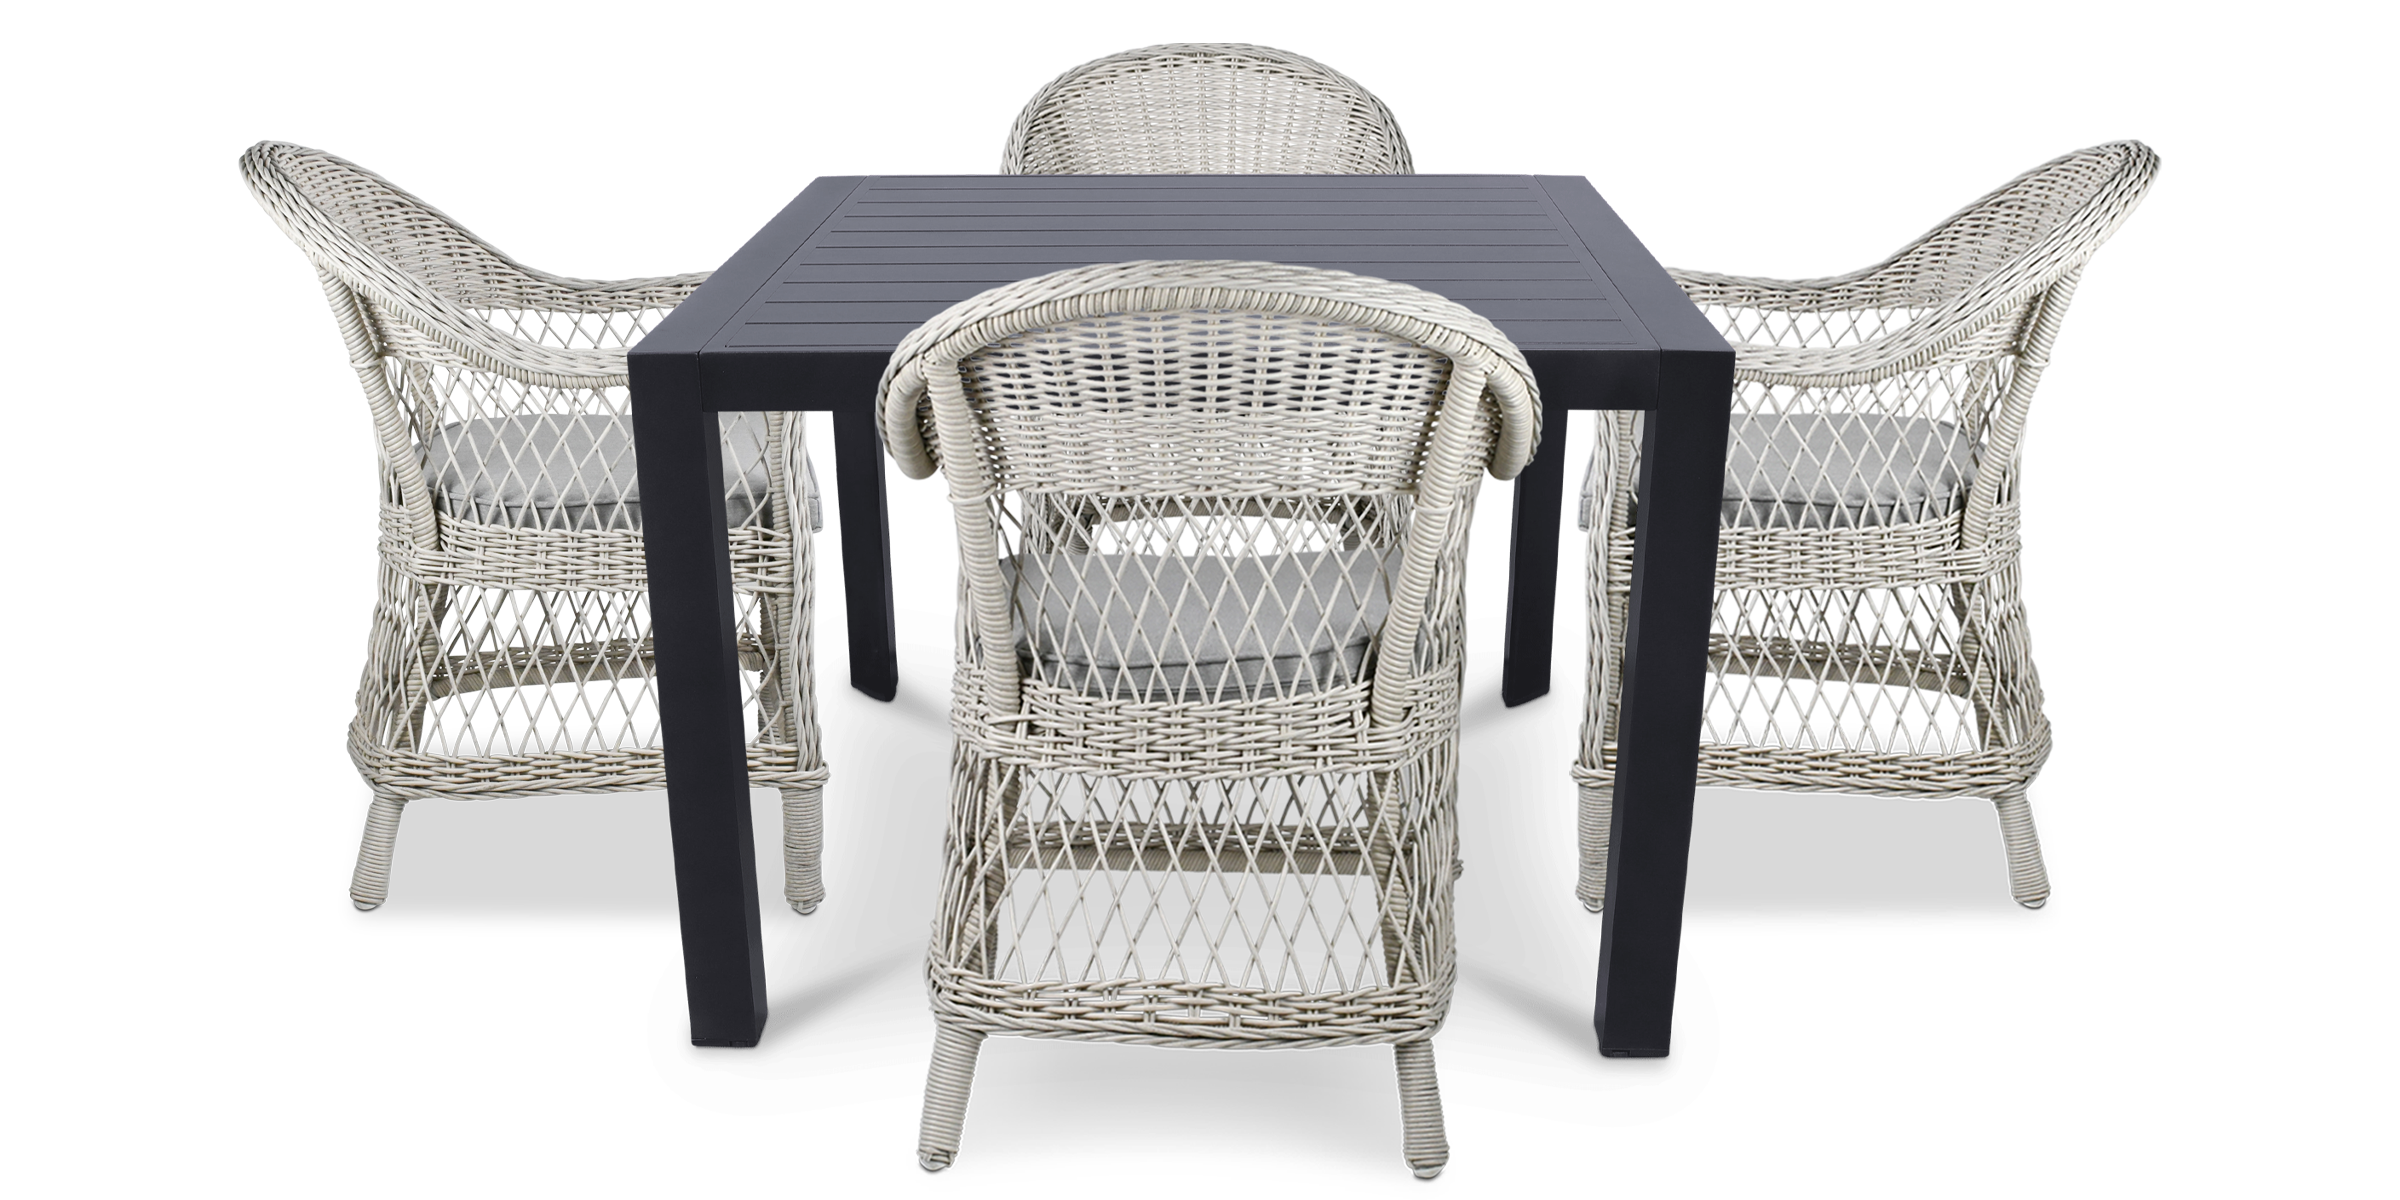 Bahamas Square 5 Piece Outdoor Setting in Gunmetal with Wicker Chairs